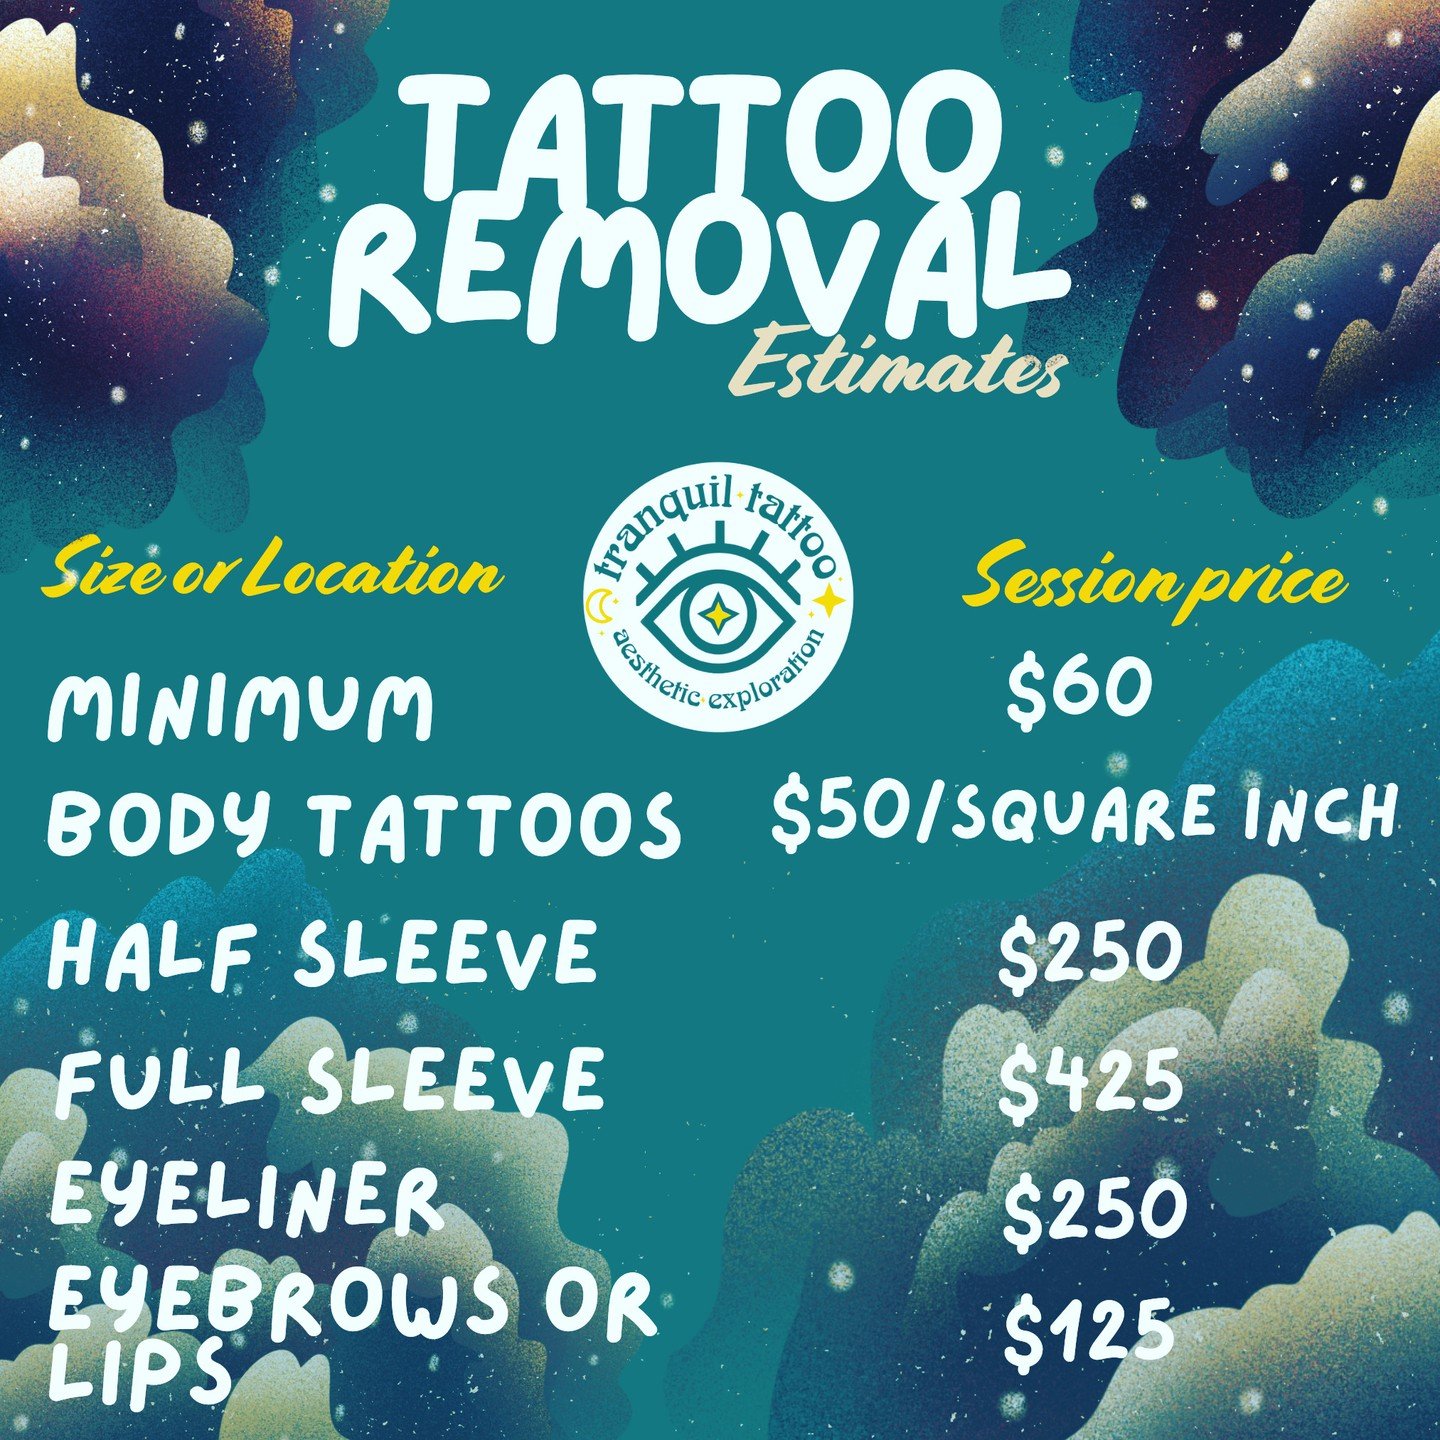 Hello friends! I have an updated price list for all &gt;NEW&lt; appointments starting May 1st 2024!

PLEASE NOTE! All of my clients who have started treatment or booked sessions prior to May 1st 2024 are LOCKED IN to the old pricing structure through